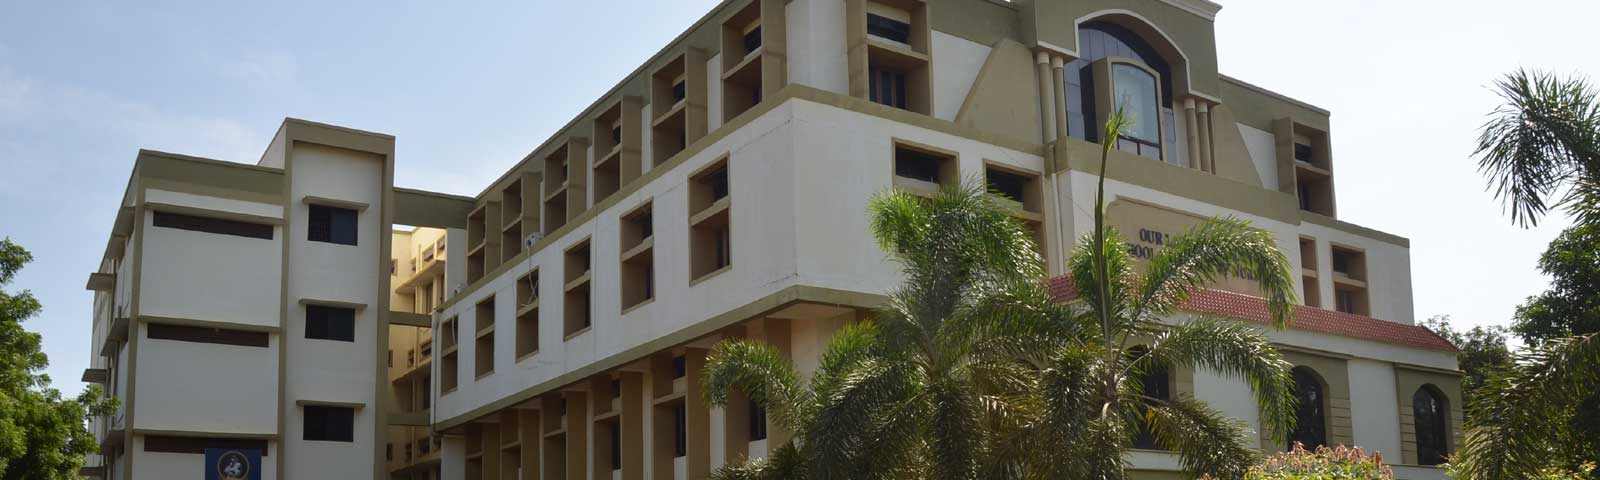 Our Lady of Health School and College of Nursing, Thanjavur Image